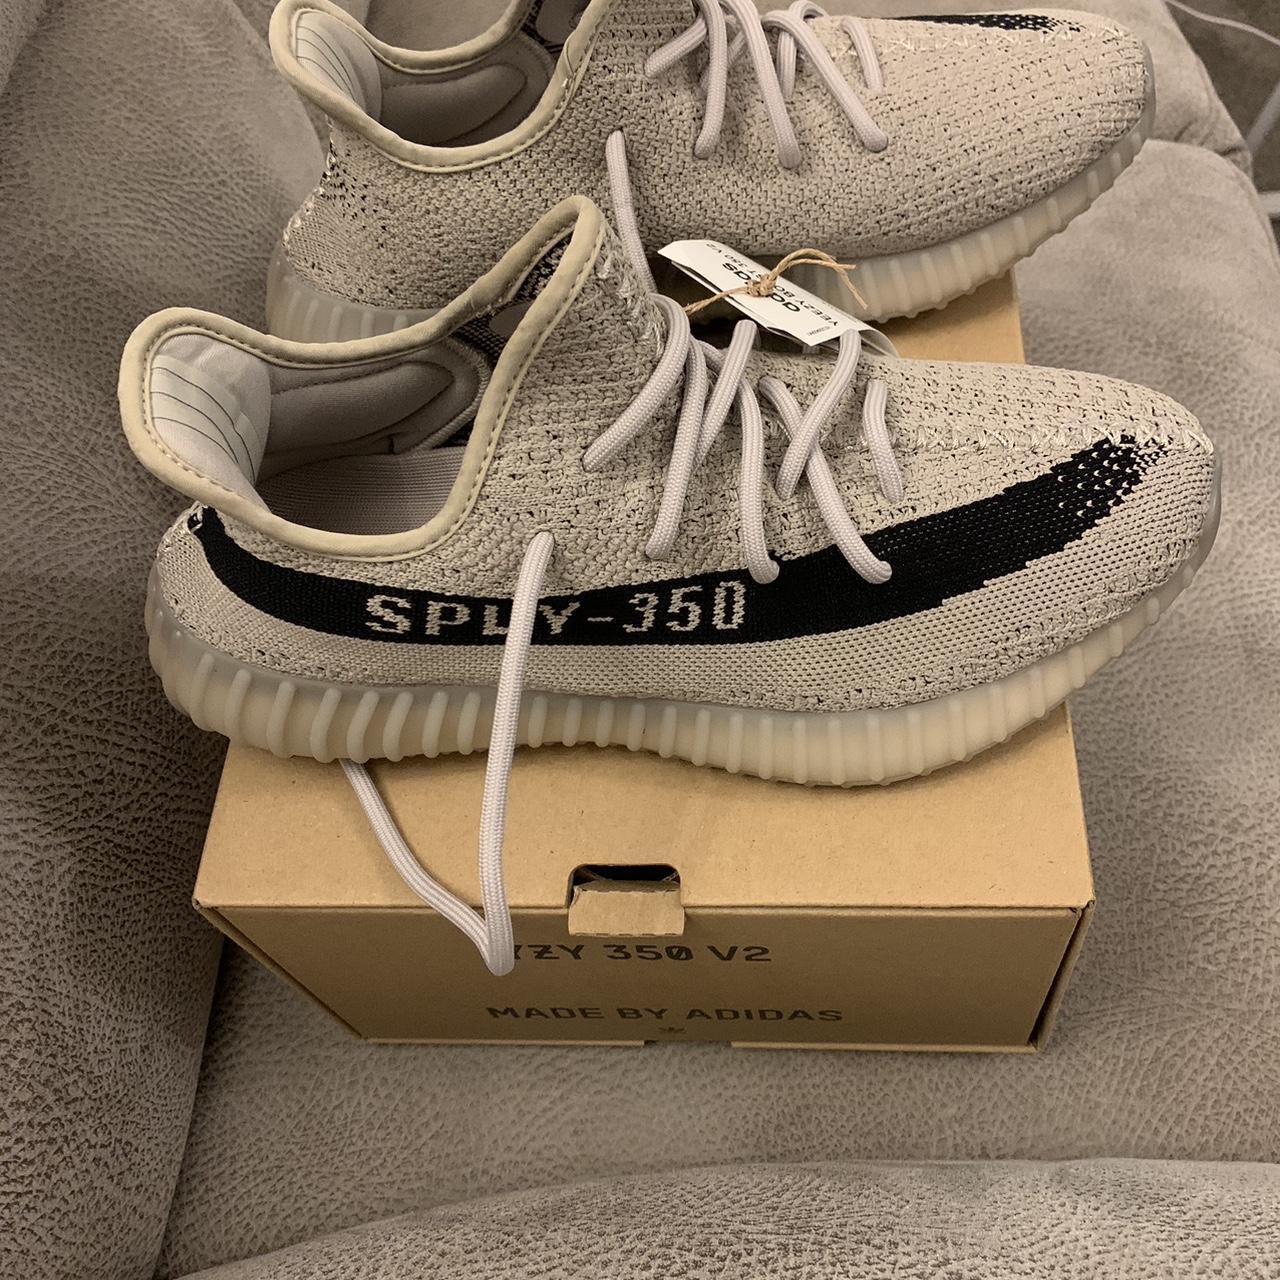 ADIDAS YZY 350 V2 BRAND NEW ONLY WORN ONCE SIZE... - Depop